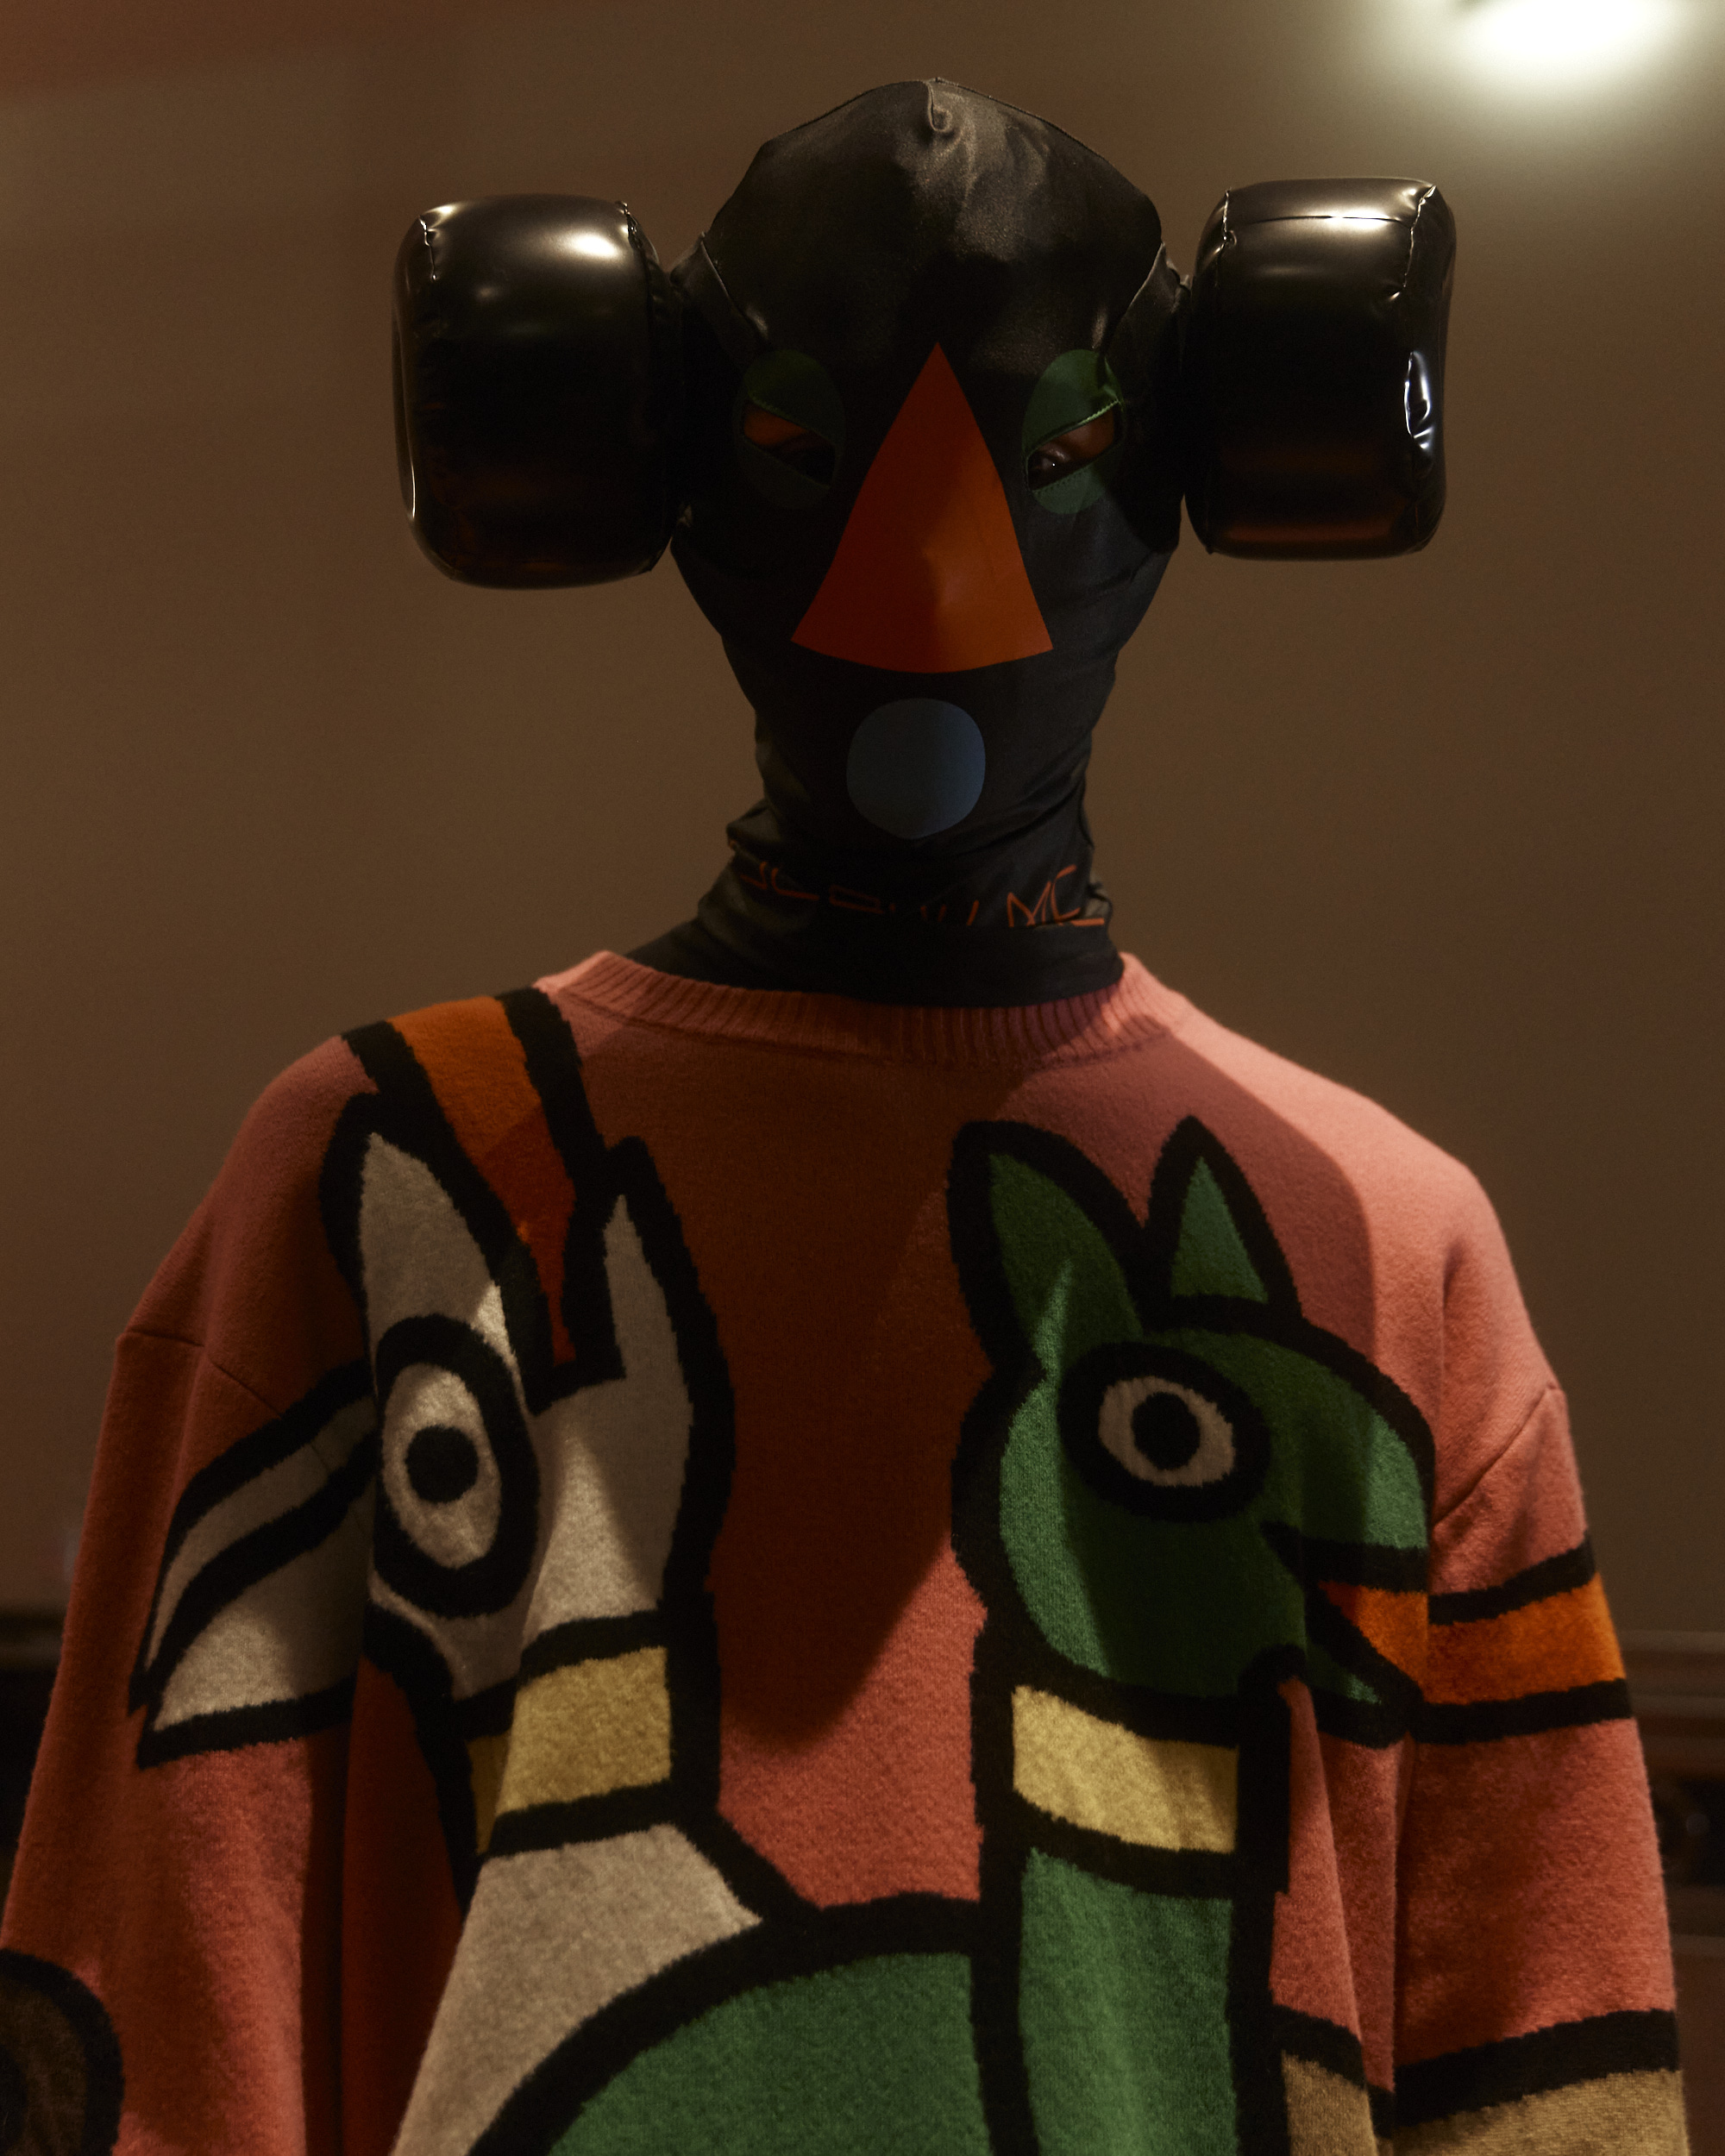 Model wearing a face mask and patterned sweater